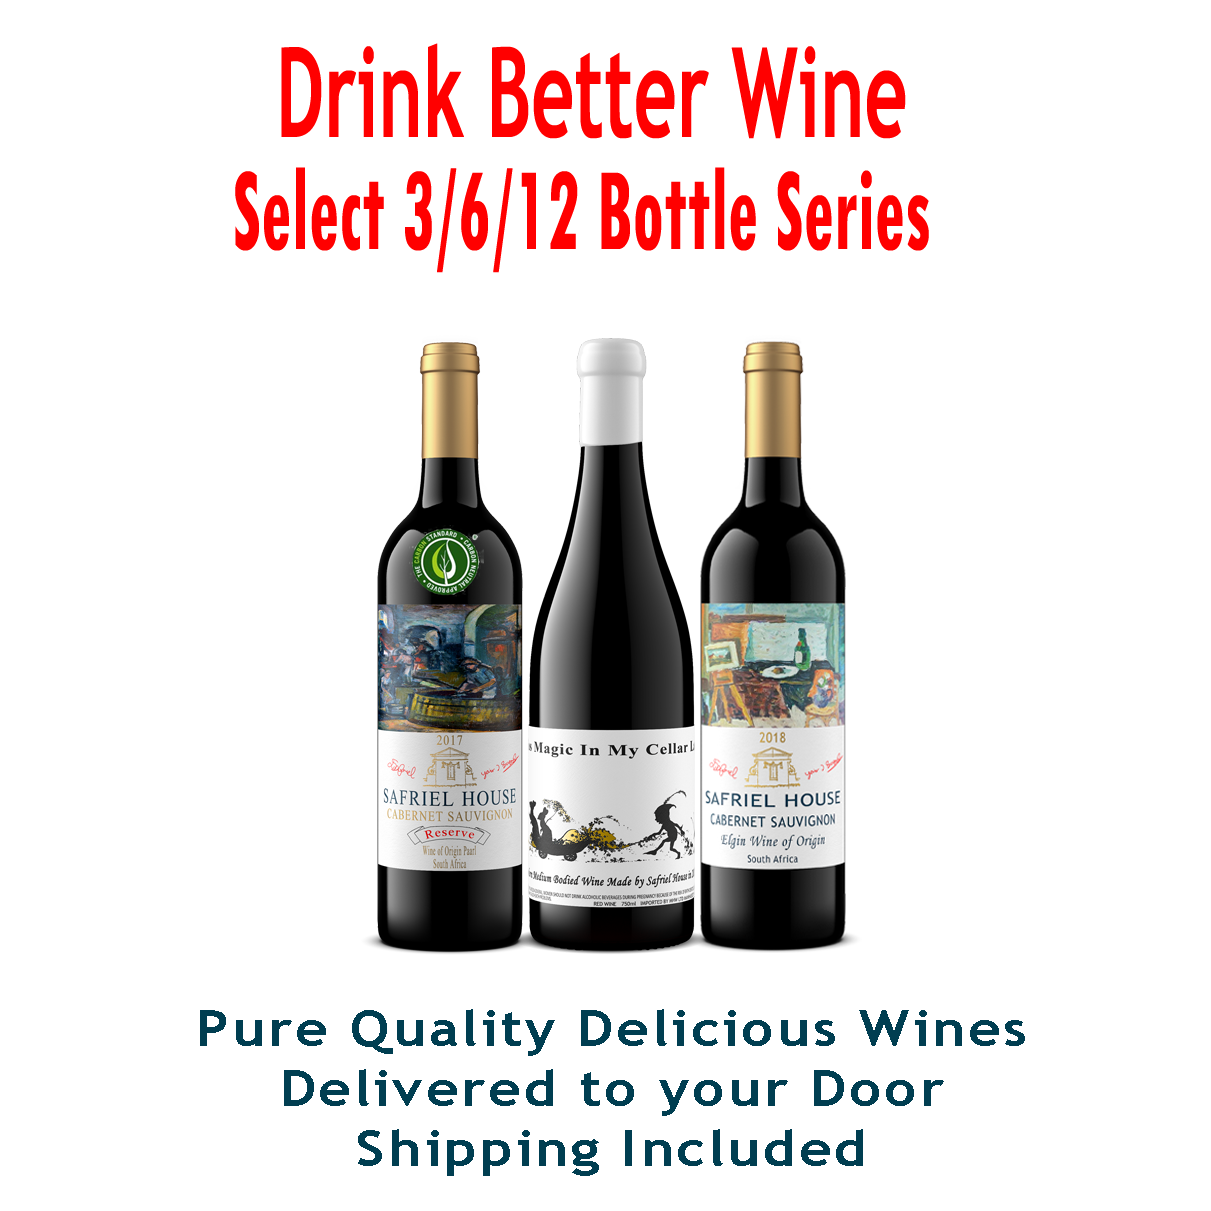 Drink Better Wine Club -"TODAY ONLY" ENTER DISCOUNT CODE 'WMB20' AT CHECKOUT